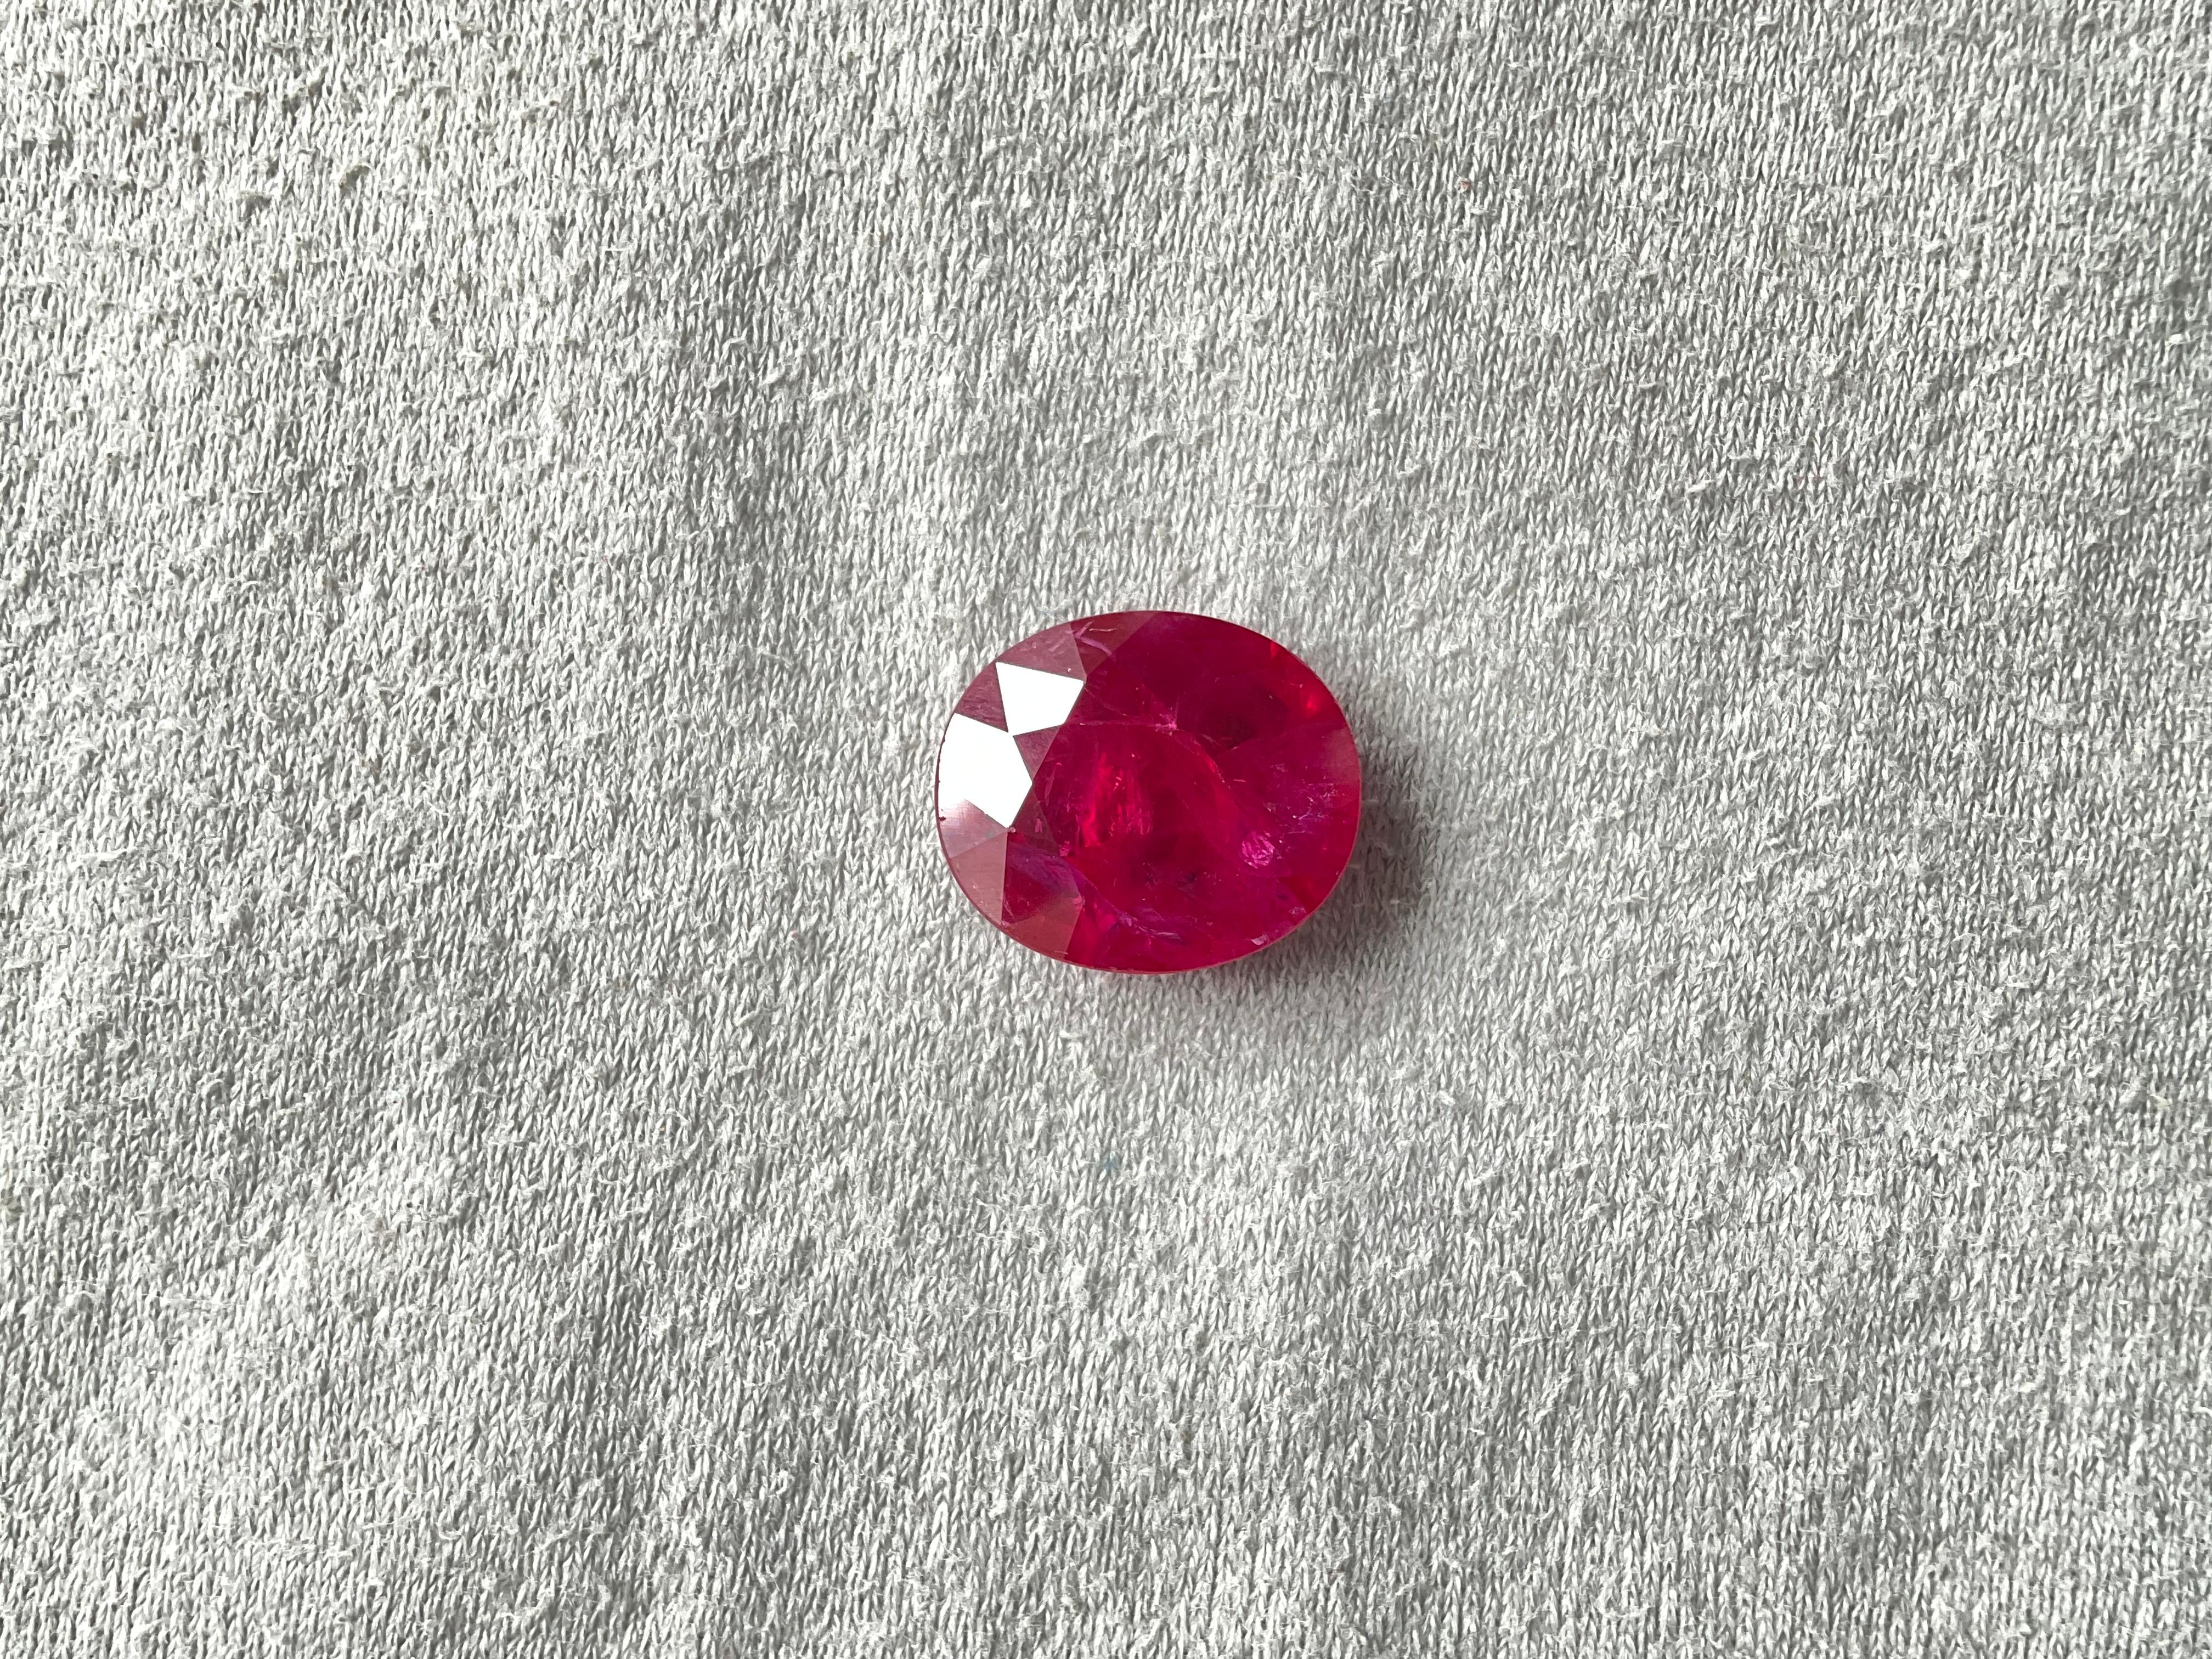 12.86 Carats Ruby Mozambique Oval Faceted Heated Cut Stone Top Quality Gemstone In New Condition For Sale In Jaipur, RJ